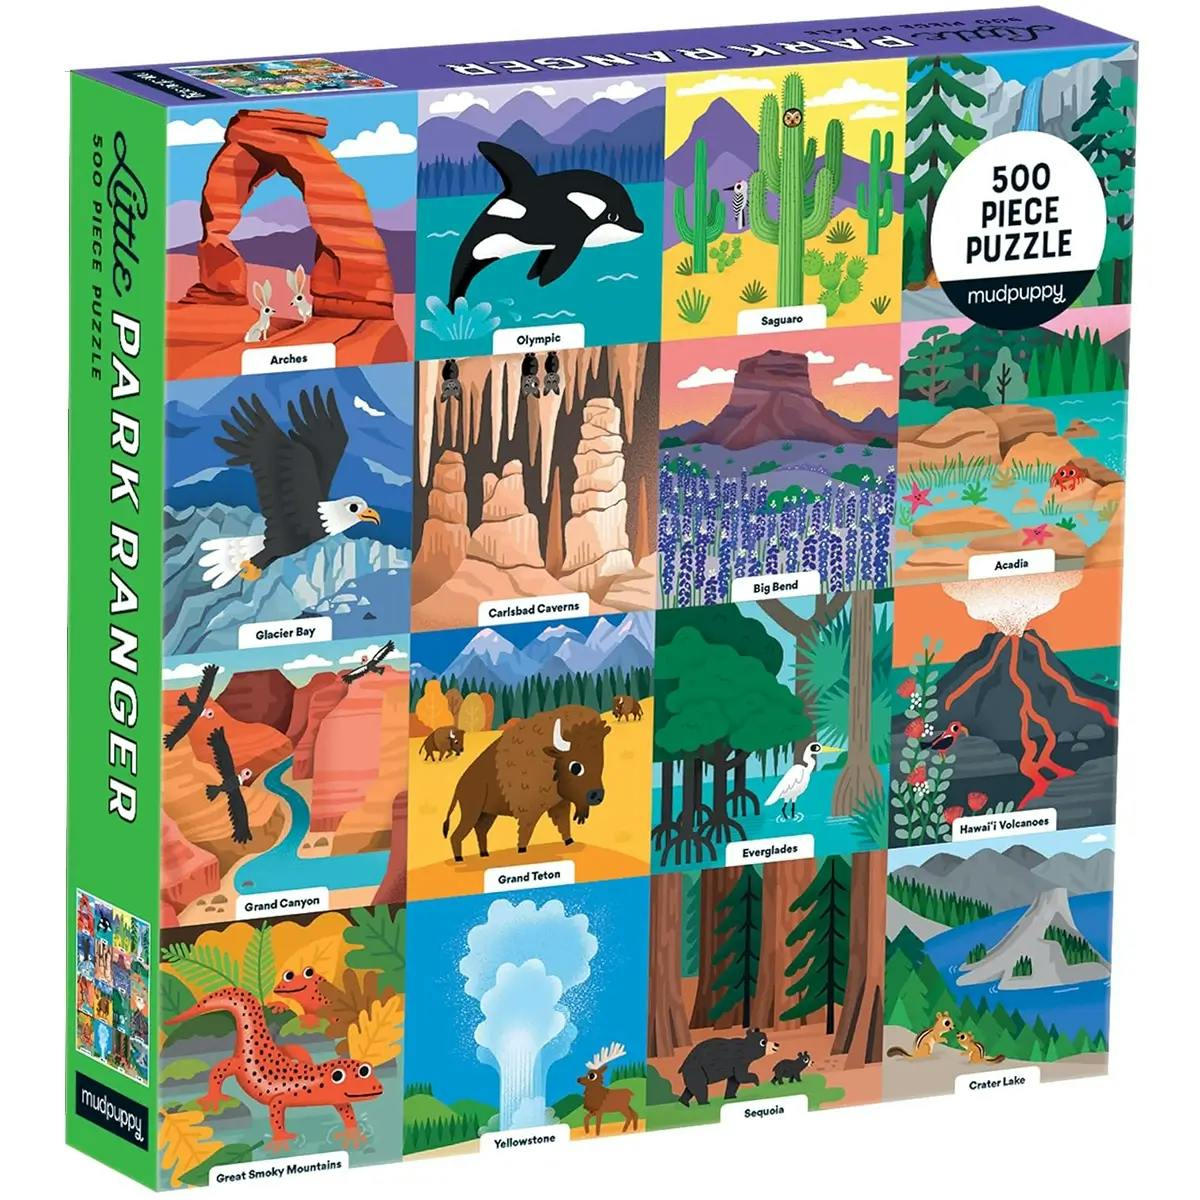 Jigsaw puzzle box showing art representing 16 American national parks.